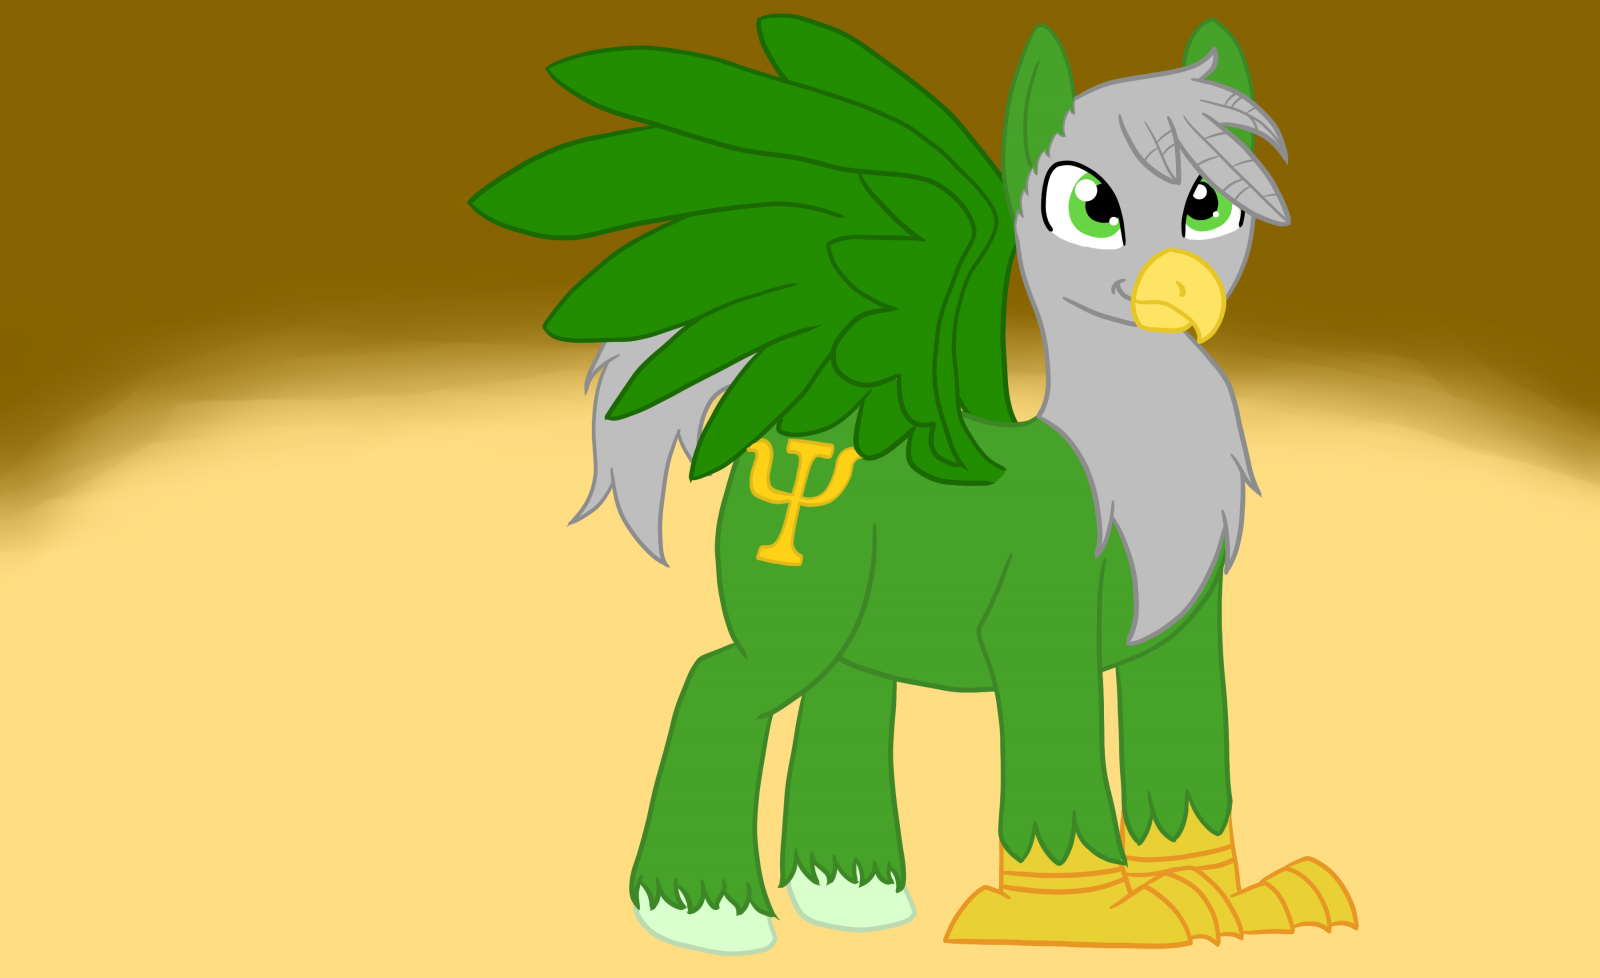 River The Hippogriff!